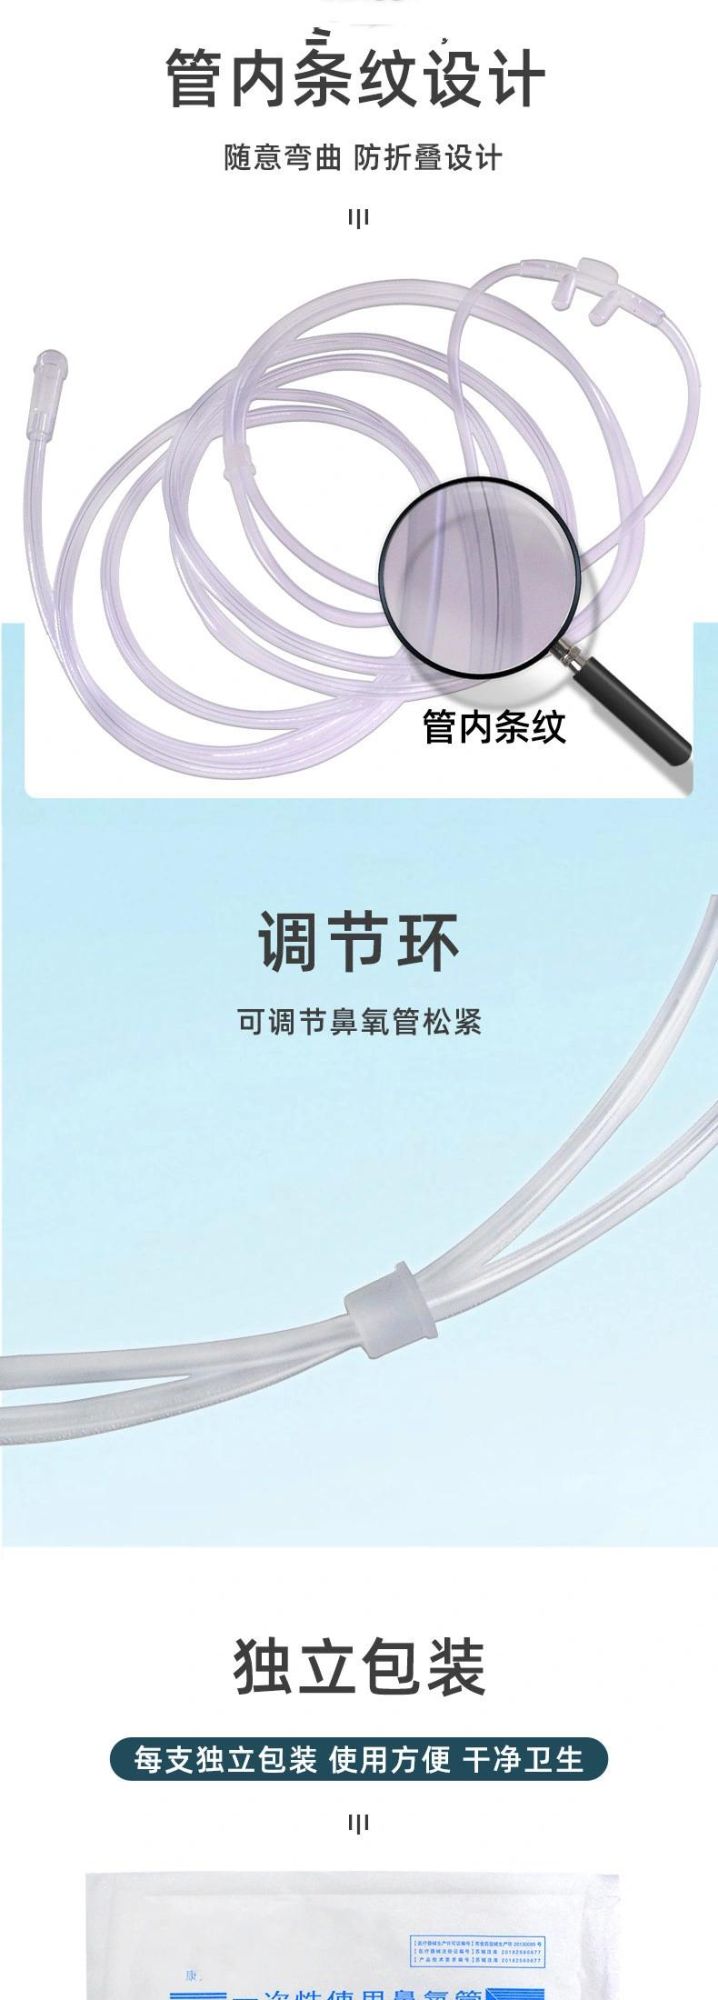 High Flow Nasal Cannula Oxygen Humidifier Oxygen Therapy Nasal Cannula